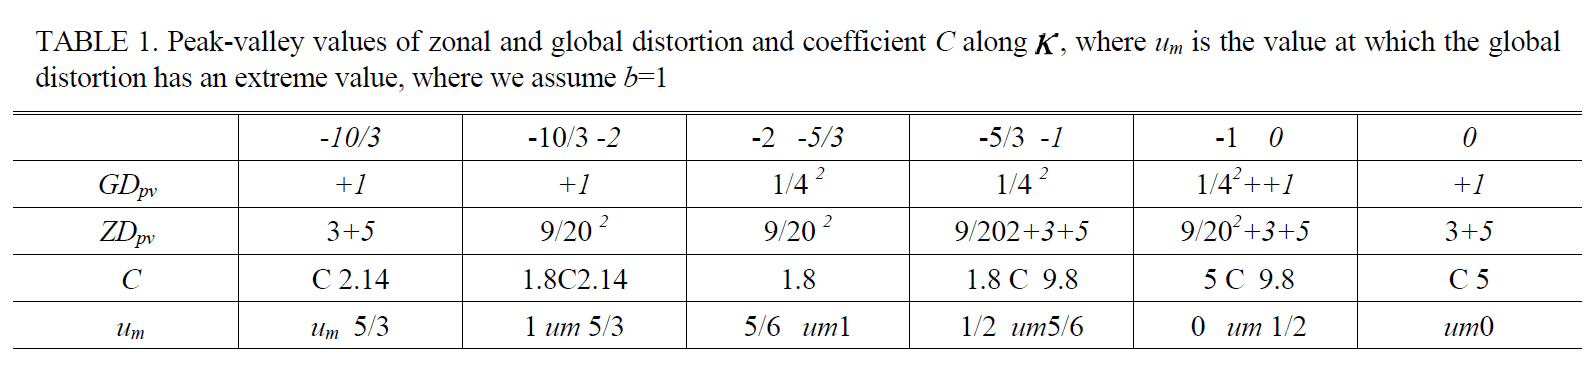 TABLE 1. Peak-valley values of zonal and global distortion and coefficient C along Κ where um is the value at which the global distortion has an extreme value where we assume b=1